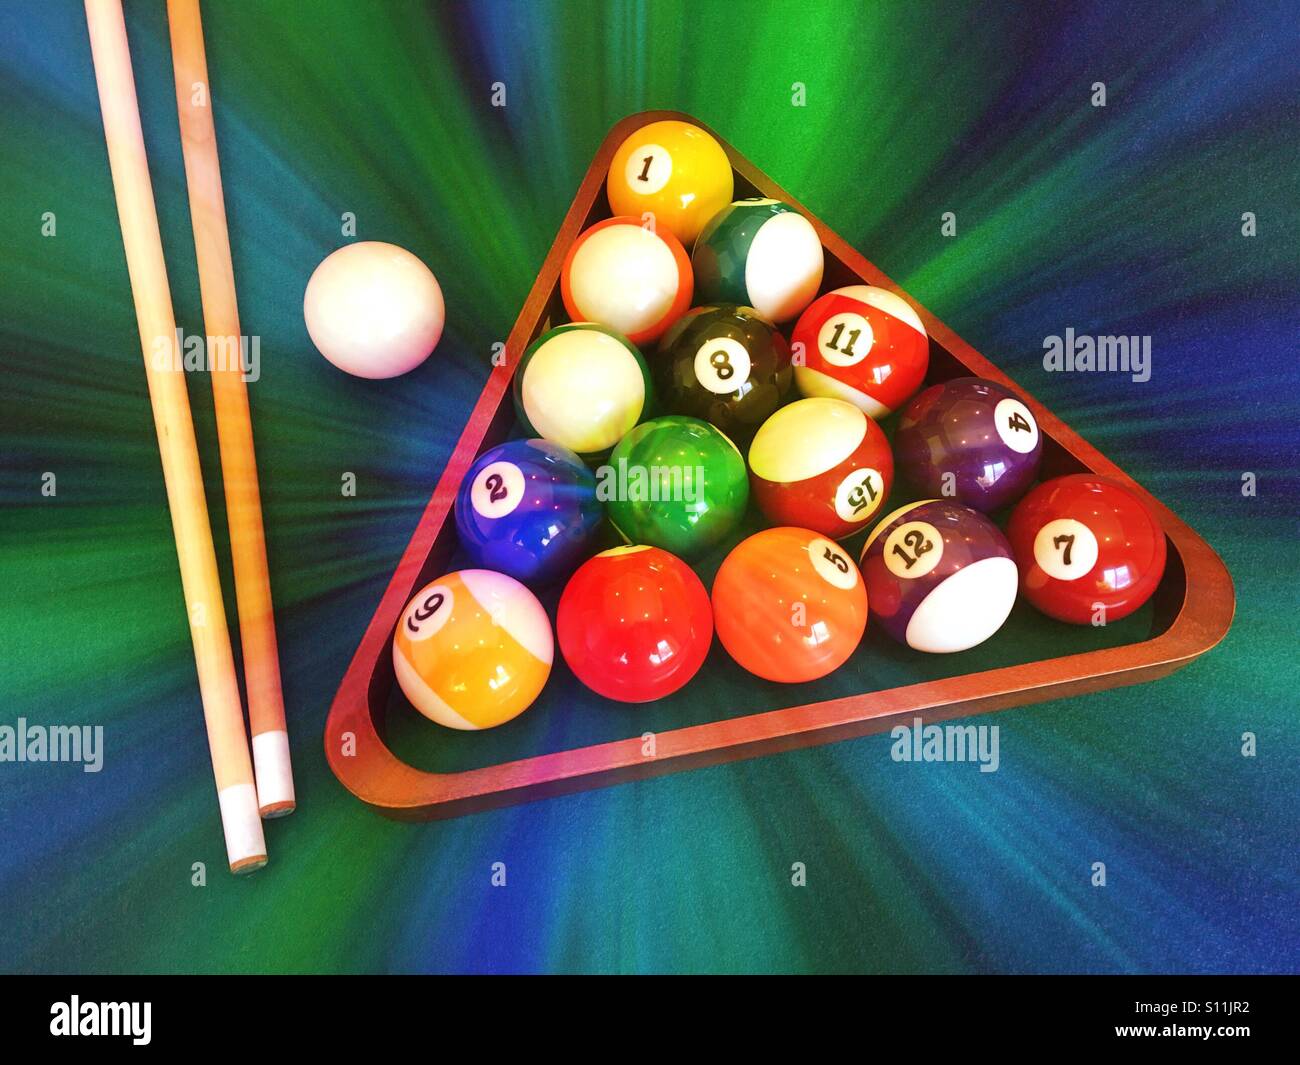 Rack of balls, cue ball and cue sticks for a game of pool Stock Photo